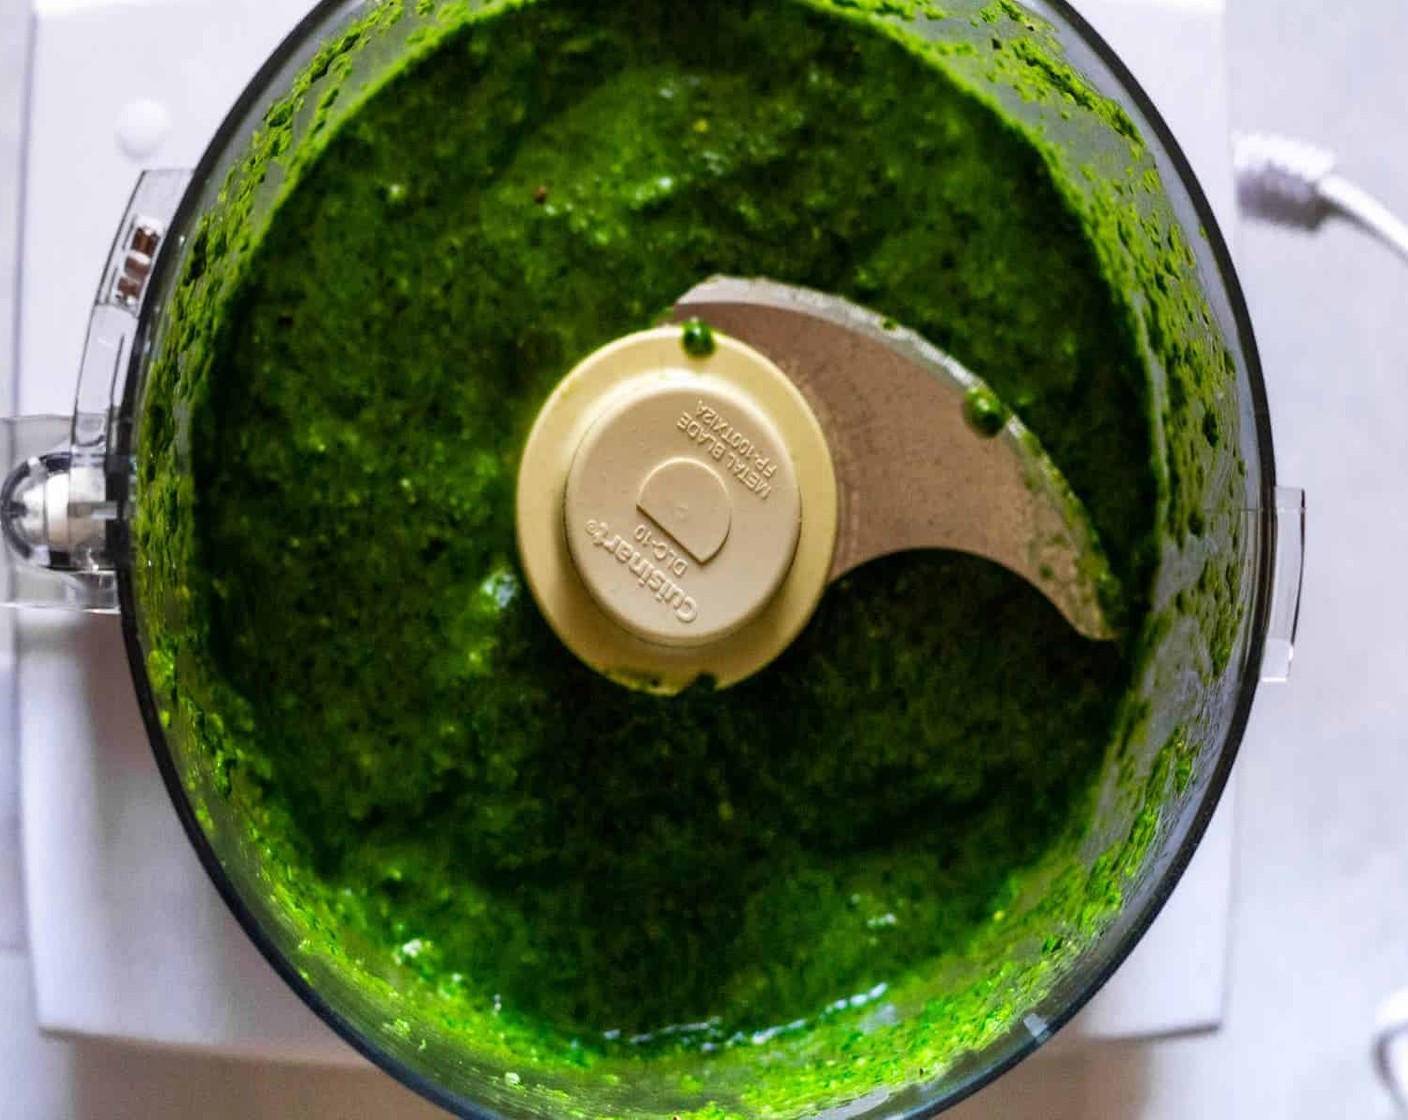 step 3 Meanwhile, make the pesto sauce by combining Fresh Basil (1 cup), Fresh Spinach (1 cup), Extra-Virgin Olive Oil (1/2 cup), Lemon (1/2), Garlic (2 cloves), Salt (to taste), and Ground Black Pepper (to taste) in a blender or food processor and pulse until the mixture is smooth.